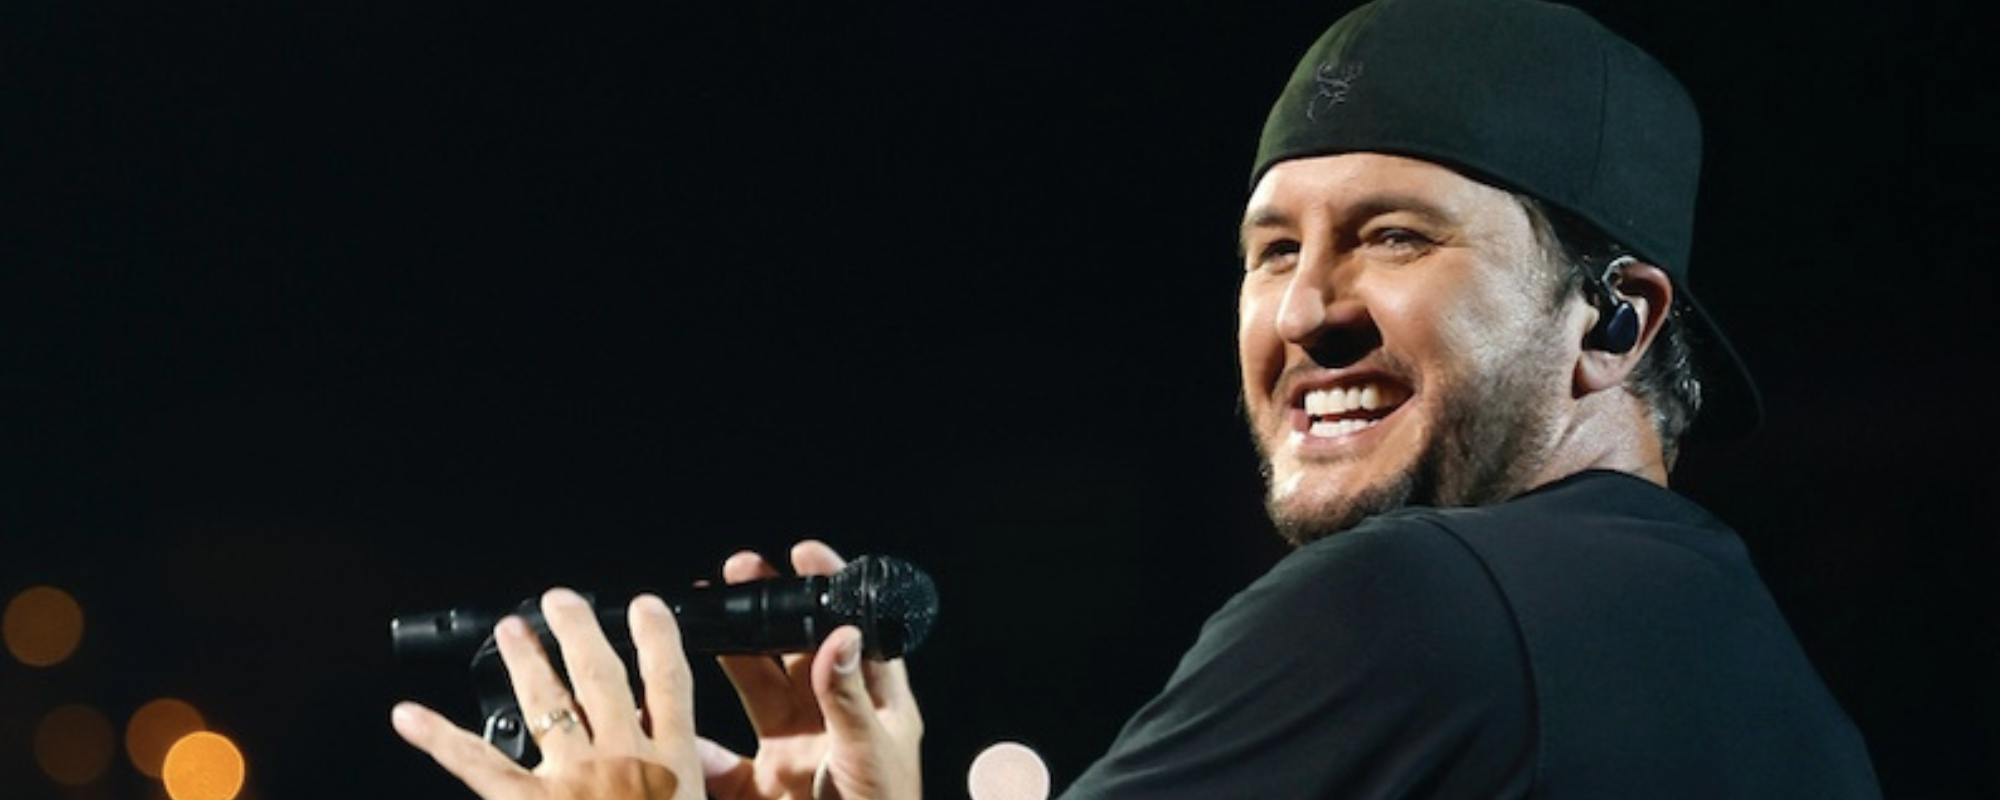 Luke Bryan Wraps up His Country On Tour, Still Has Plenty to Look Forward to in 2023